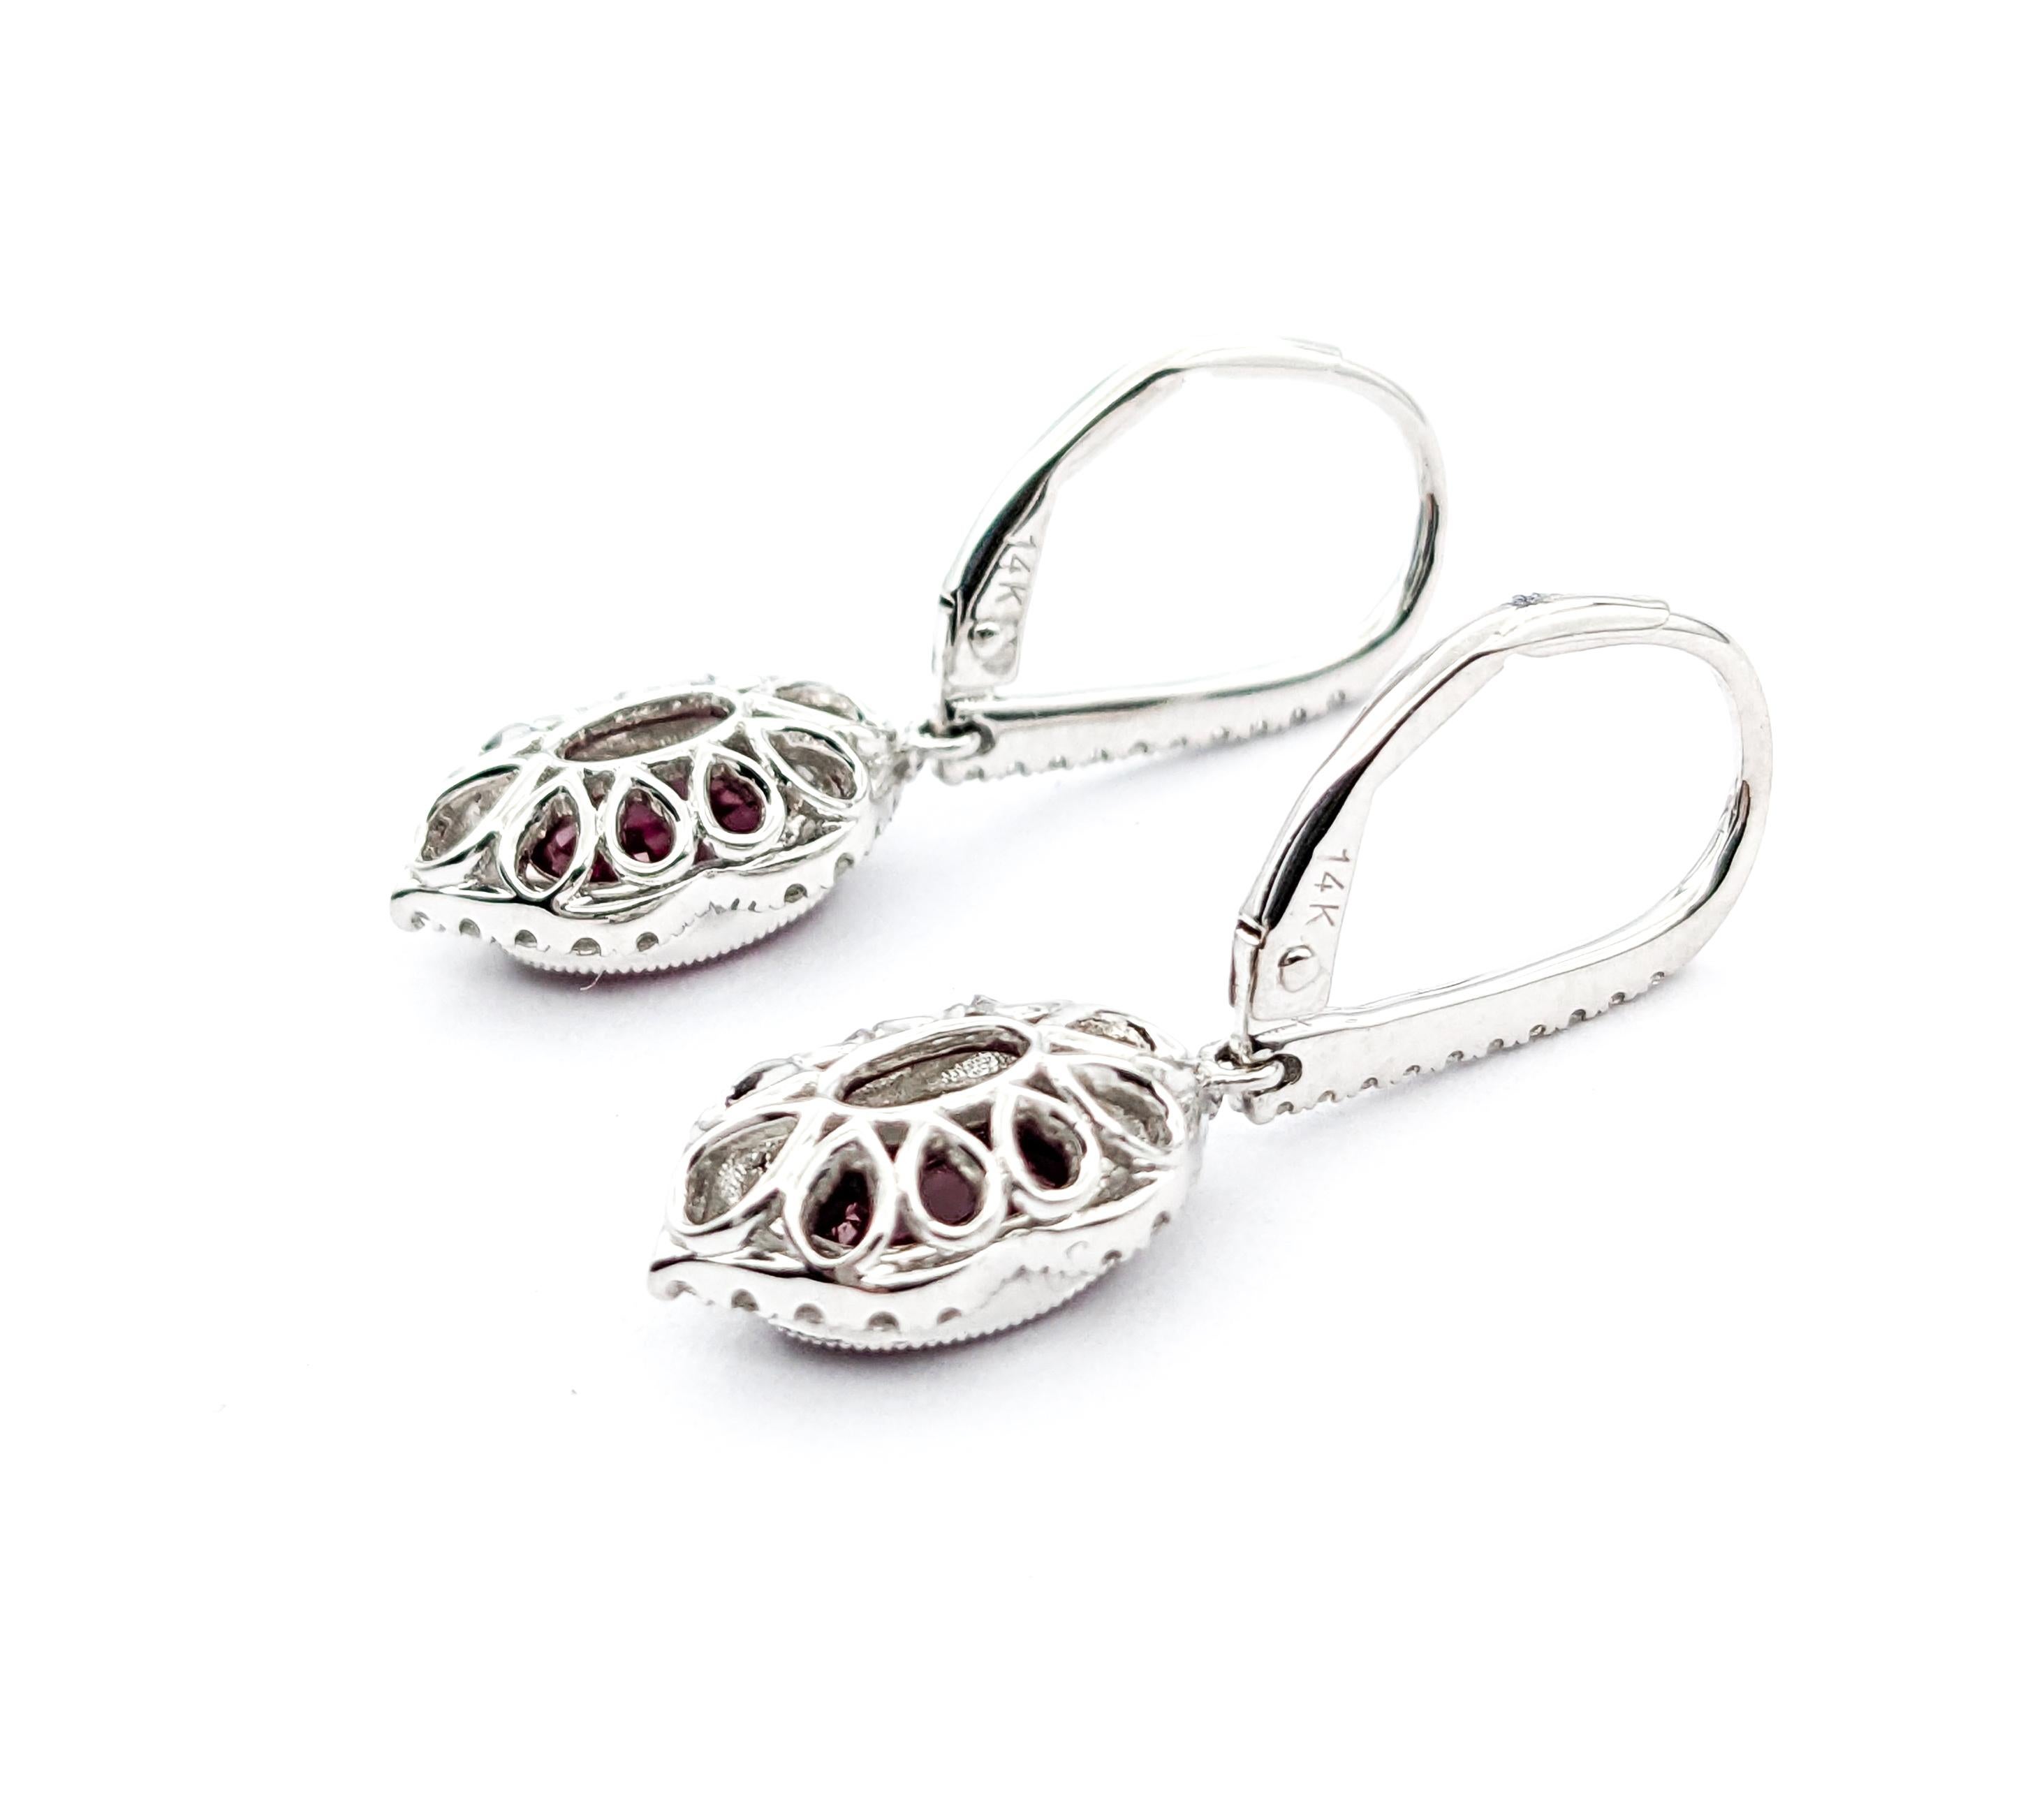 2.06ctw Rubies & Diamond Leverback Drop Earrings In White Gold

Introducing these exquisite gemstone fashion earrings crafted in 14k white gold, featuring .30ctw of diamonds and a leverback drop design with 2.06ctw rubies. The diamonds boast SI-I